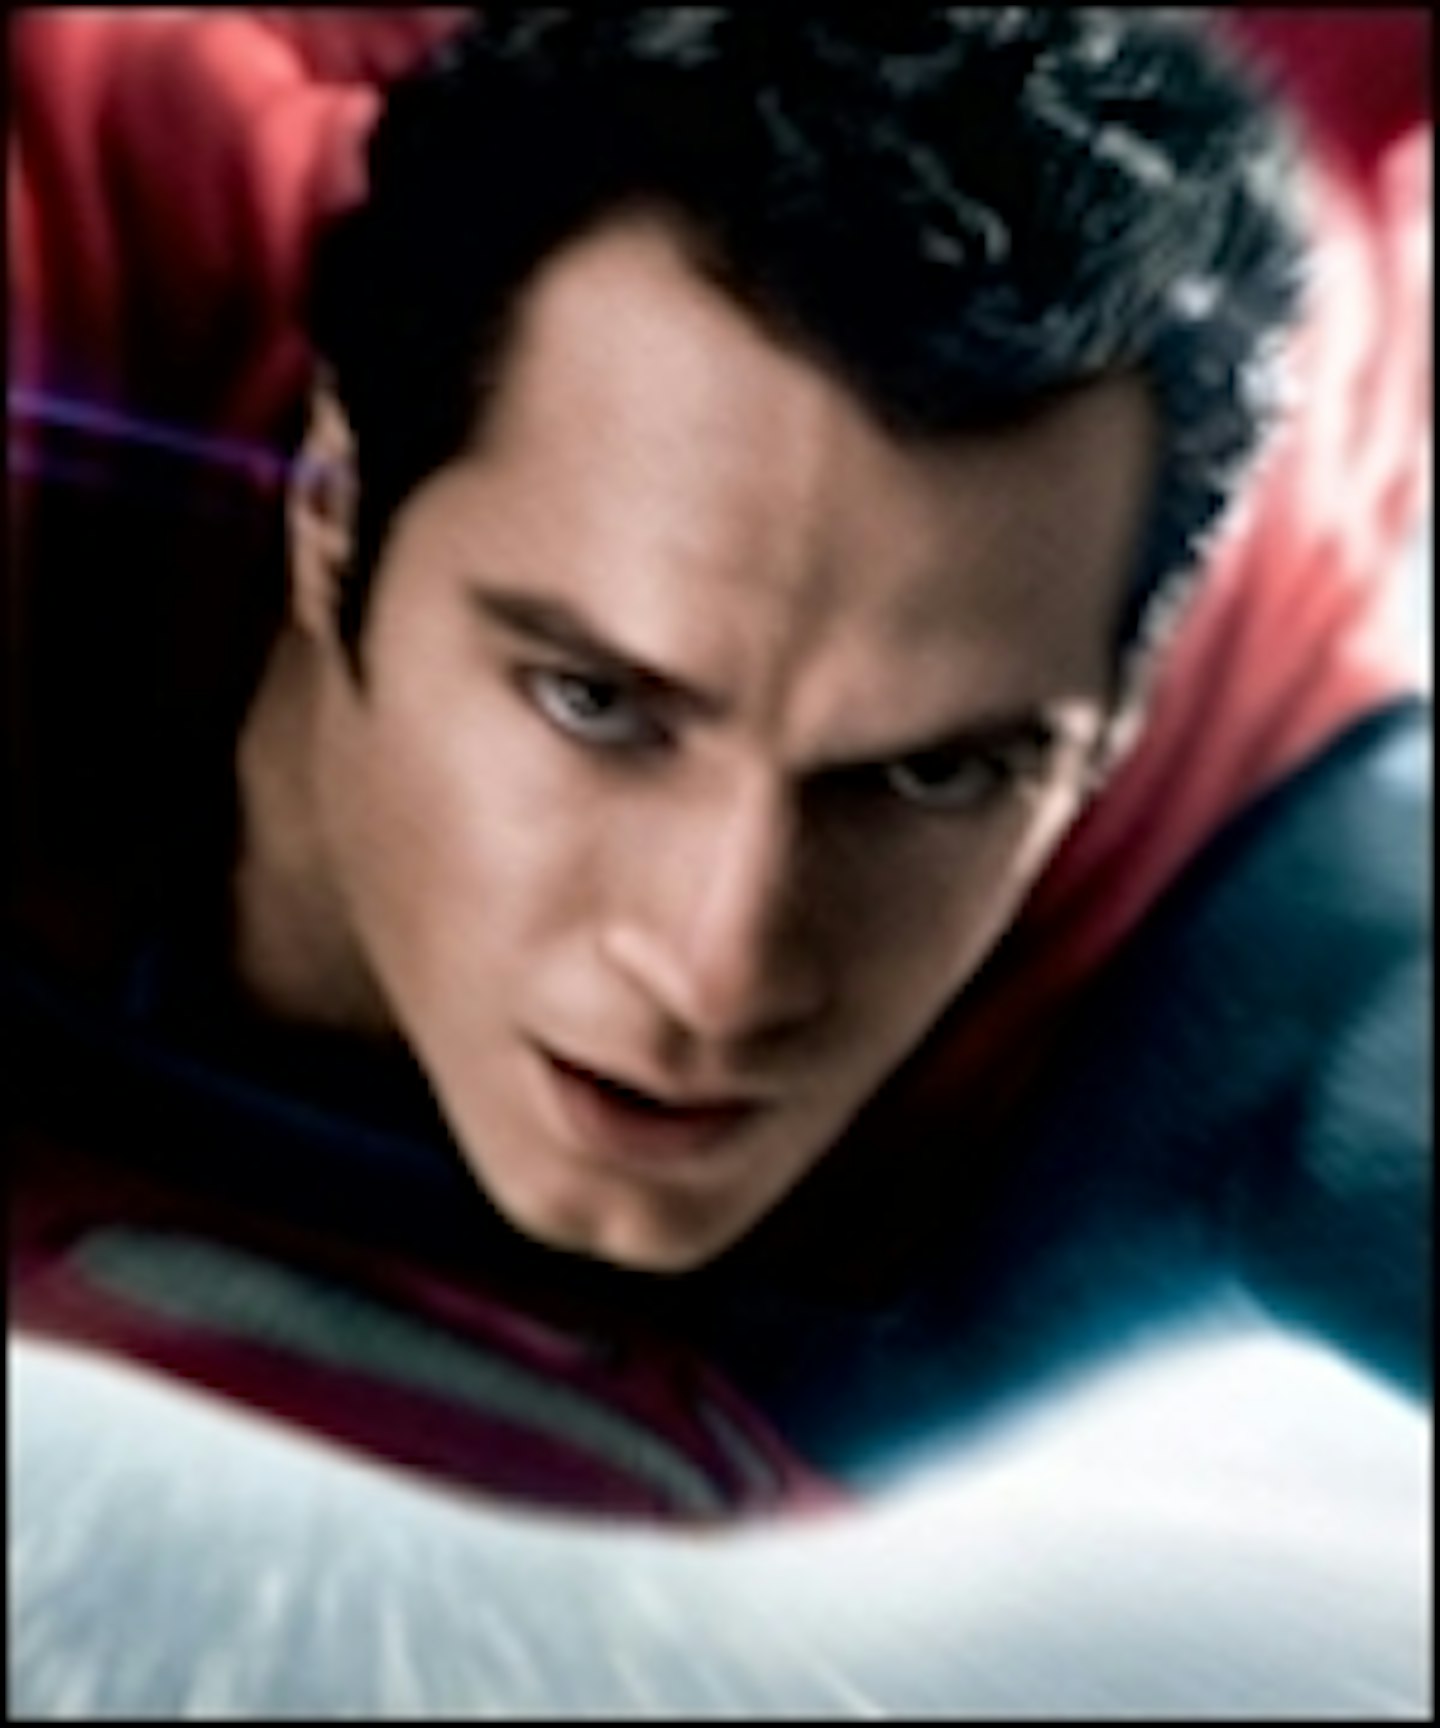 Latest Man Of Steel Poster Lands